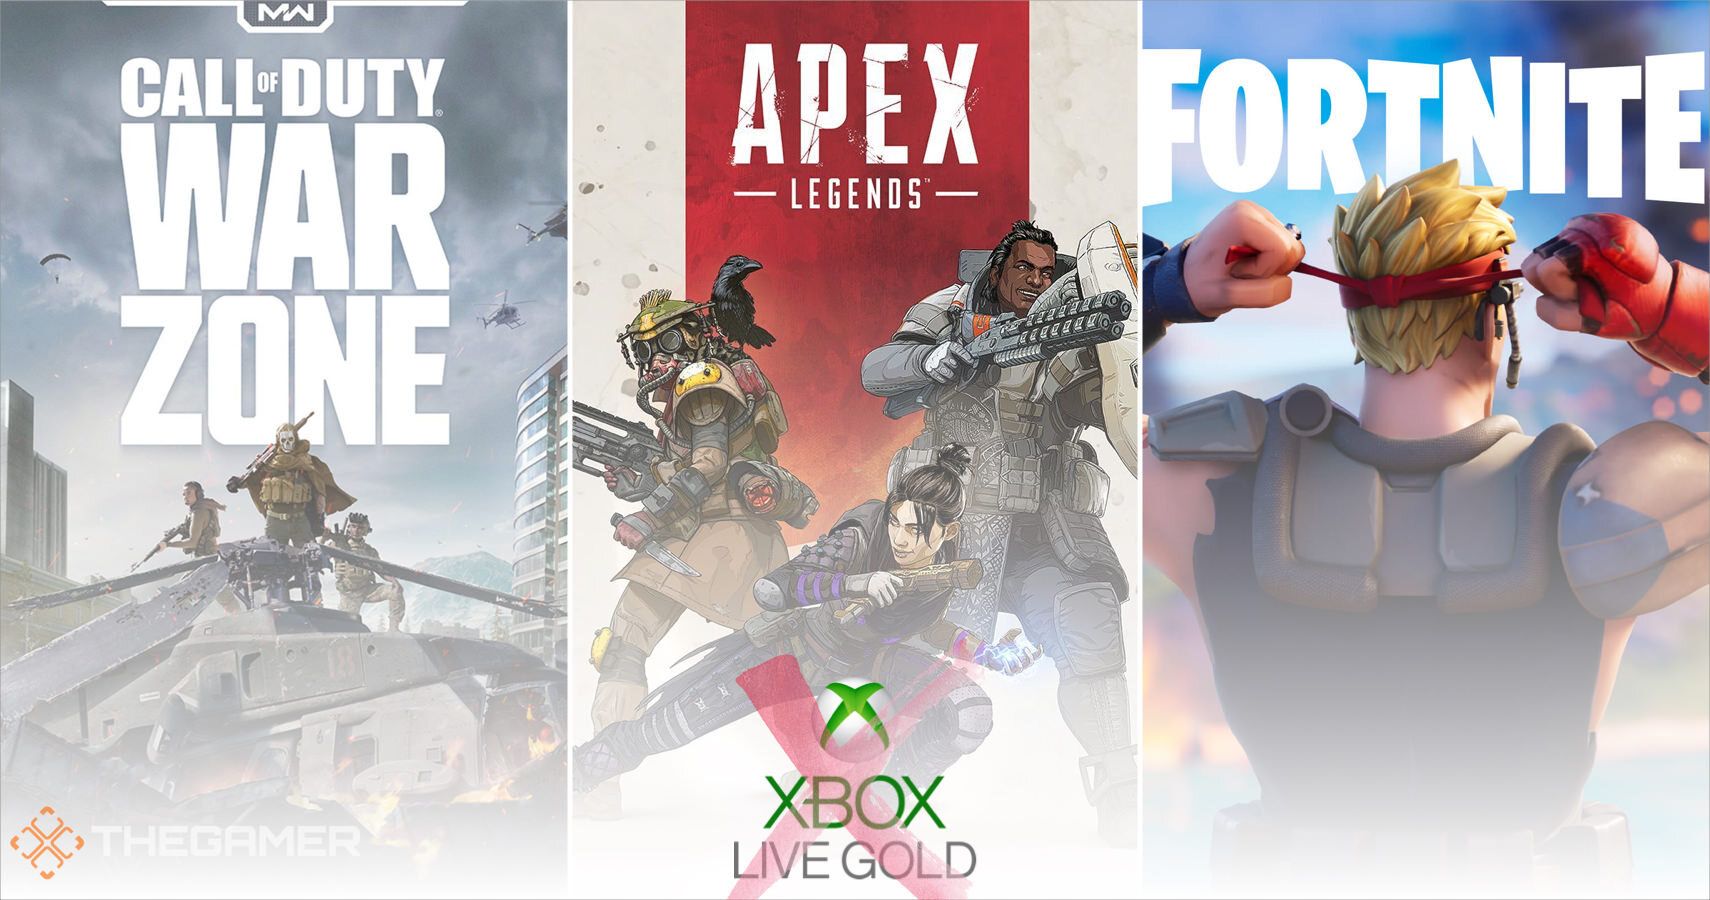 Xbox - Free-to-play now means free-to-play. Starting now, all Xbox players  can access these free-to-play games with or without an Xbox Live Gold  subscription